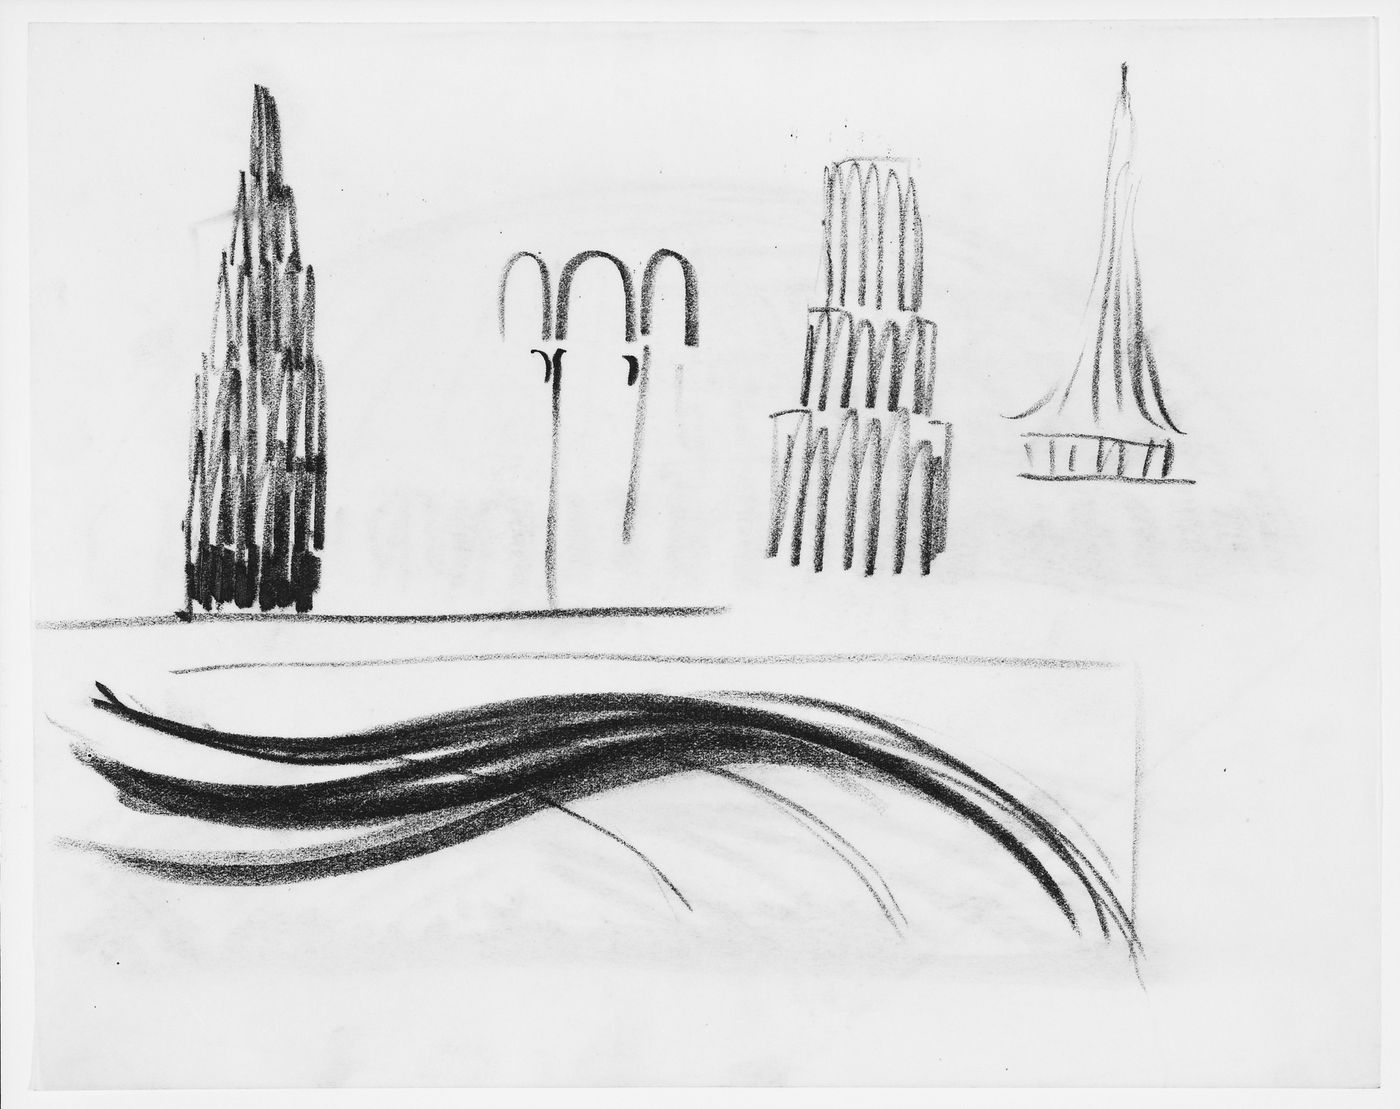 Sketch of towers, possibly for the Congress hall and Restaurant for the Berlin Fairground